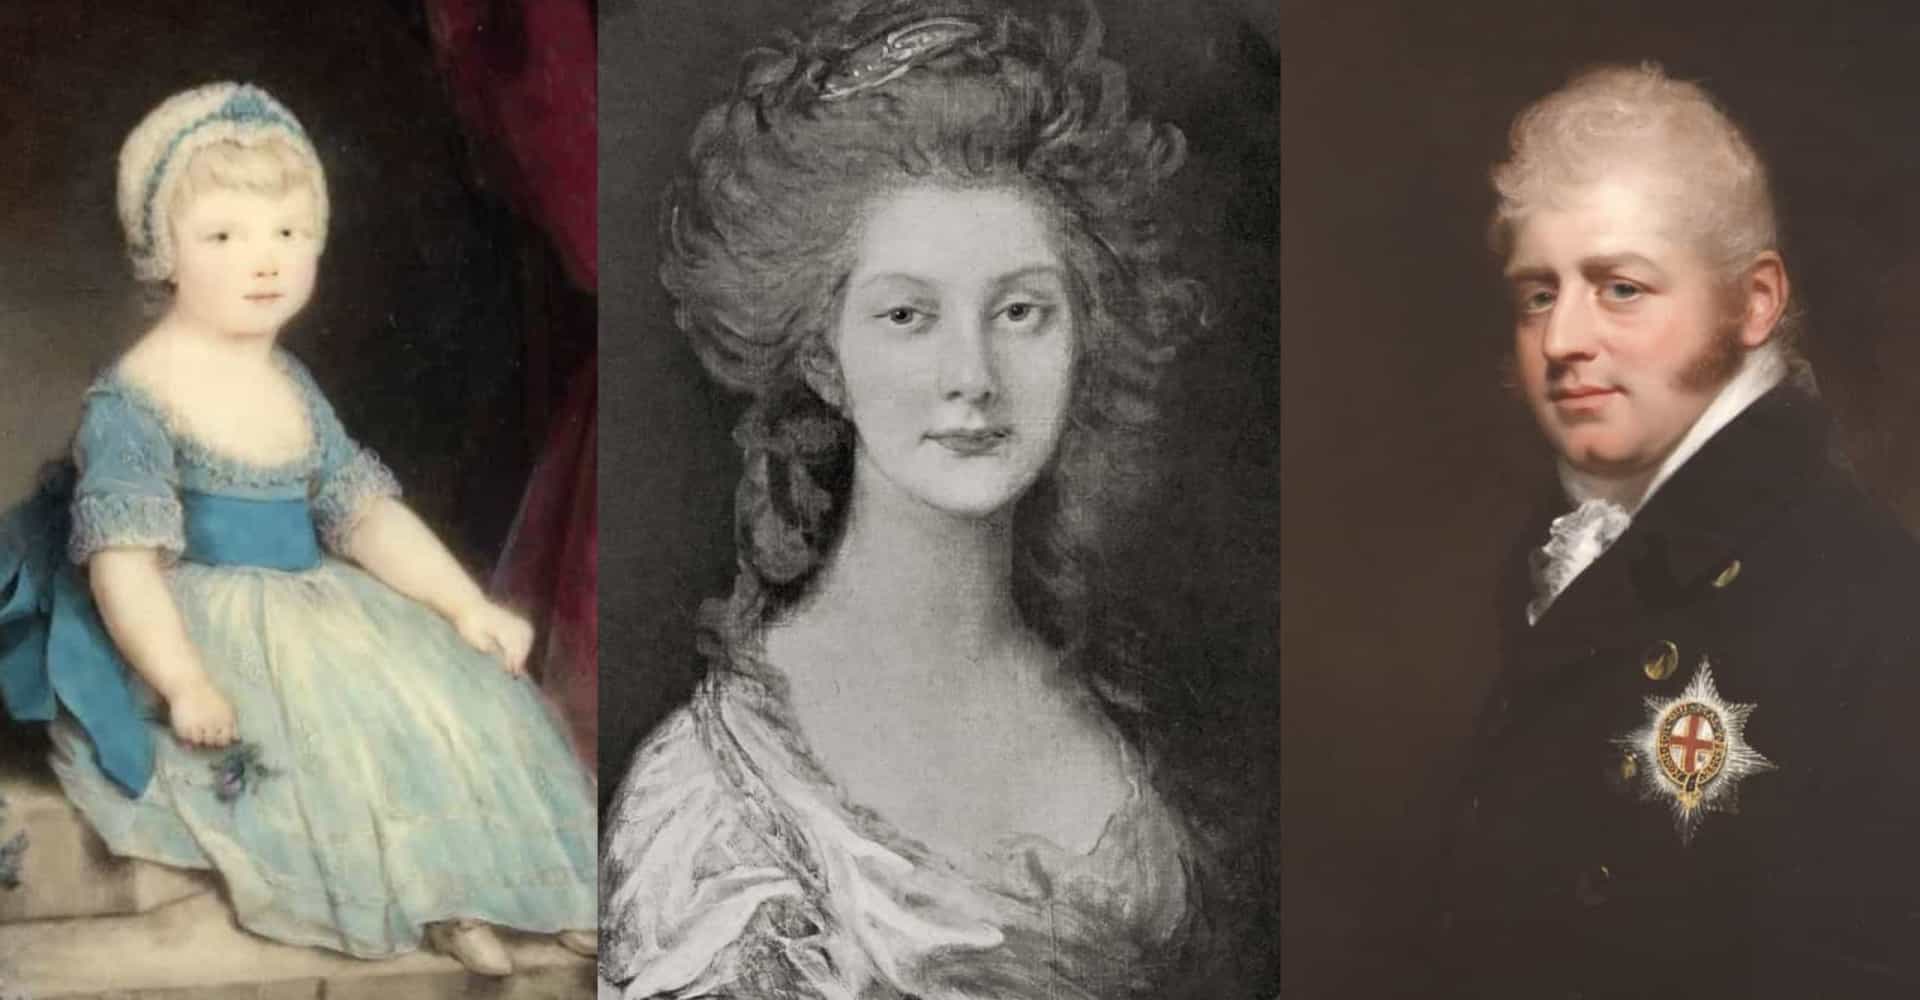 <p>Sure, families were a lot bigger back then, but King George III and Queen Charlotte really went for it and had 15 children! These men and women ended up shaping the British monarchy, and a few tried to steer the <a href="https://www.starsinsider.com/lifestyle/450359/the-royal-weddings-that-changed-european-history" rel="noopener">British royal family</a> in different directions. Some even became kings themselves.</p><p>From the moment George III's first child was born, in 1762, to when the last one died, in 1857, in this gallery you'll learn all about who his 15 children were, and their contributions to history. Click on for more.</p><p>You may also like: <a href="https://www.starsinsider.com/n/145704?utm_source=msn.com&utm_medium=display&utm_campaign=referral_description&utm_content=498721v1en-en_selected">Creepy! Celebrities who have doppelgangers from the past</a></p>